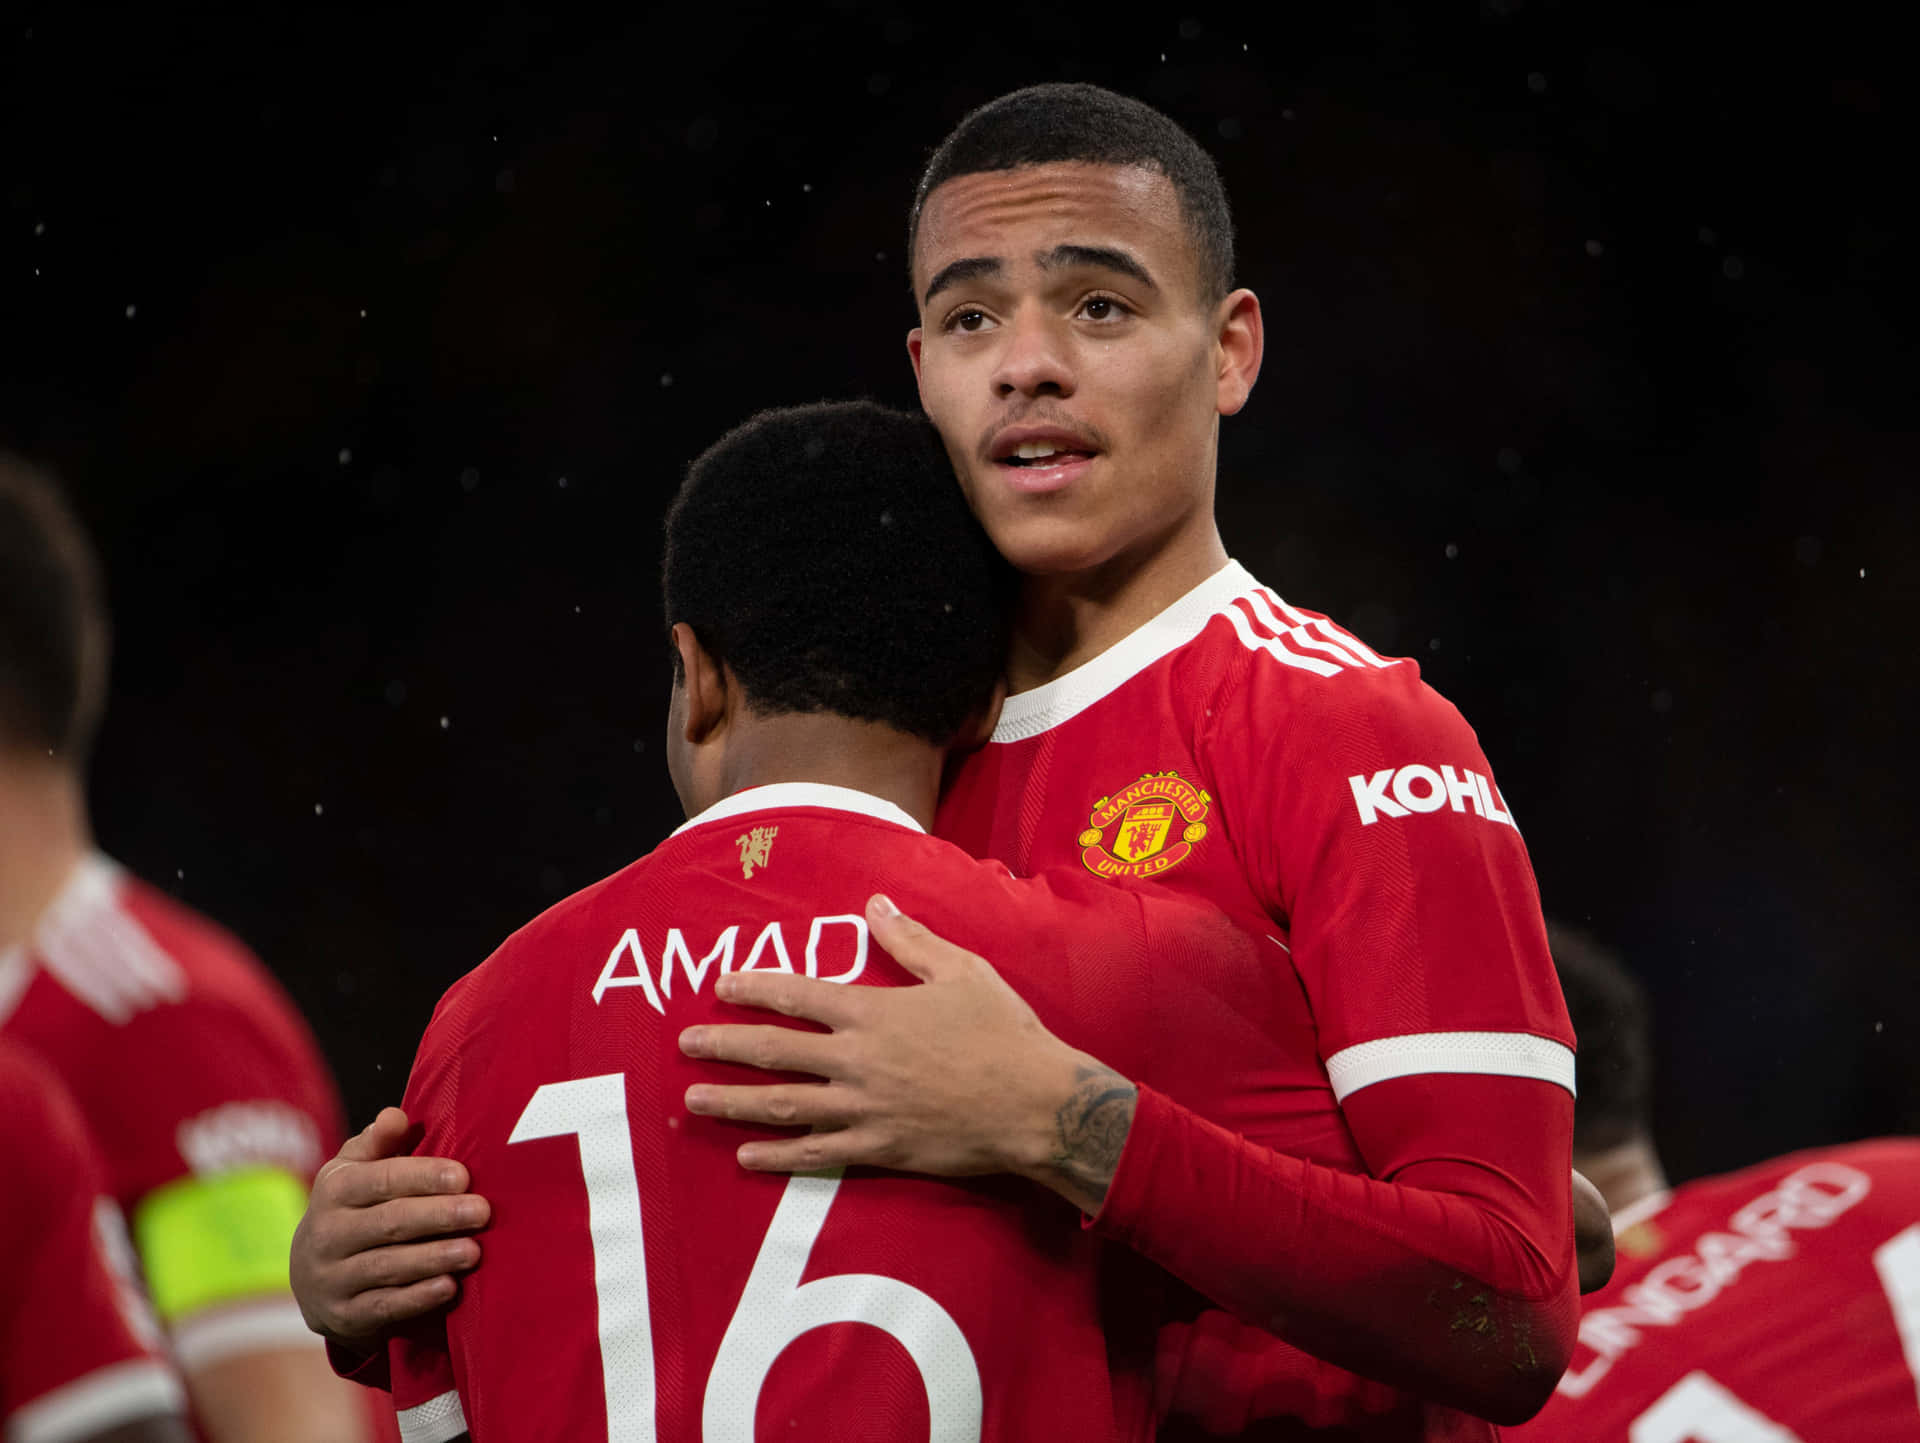 Mason Greenwood in action during a football match